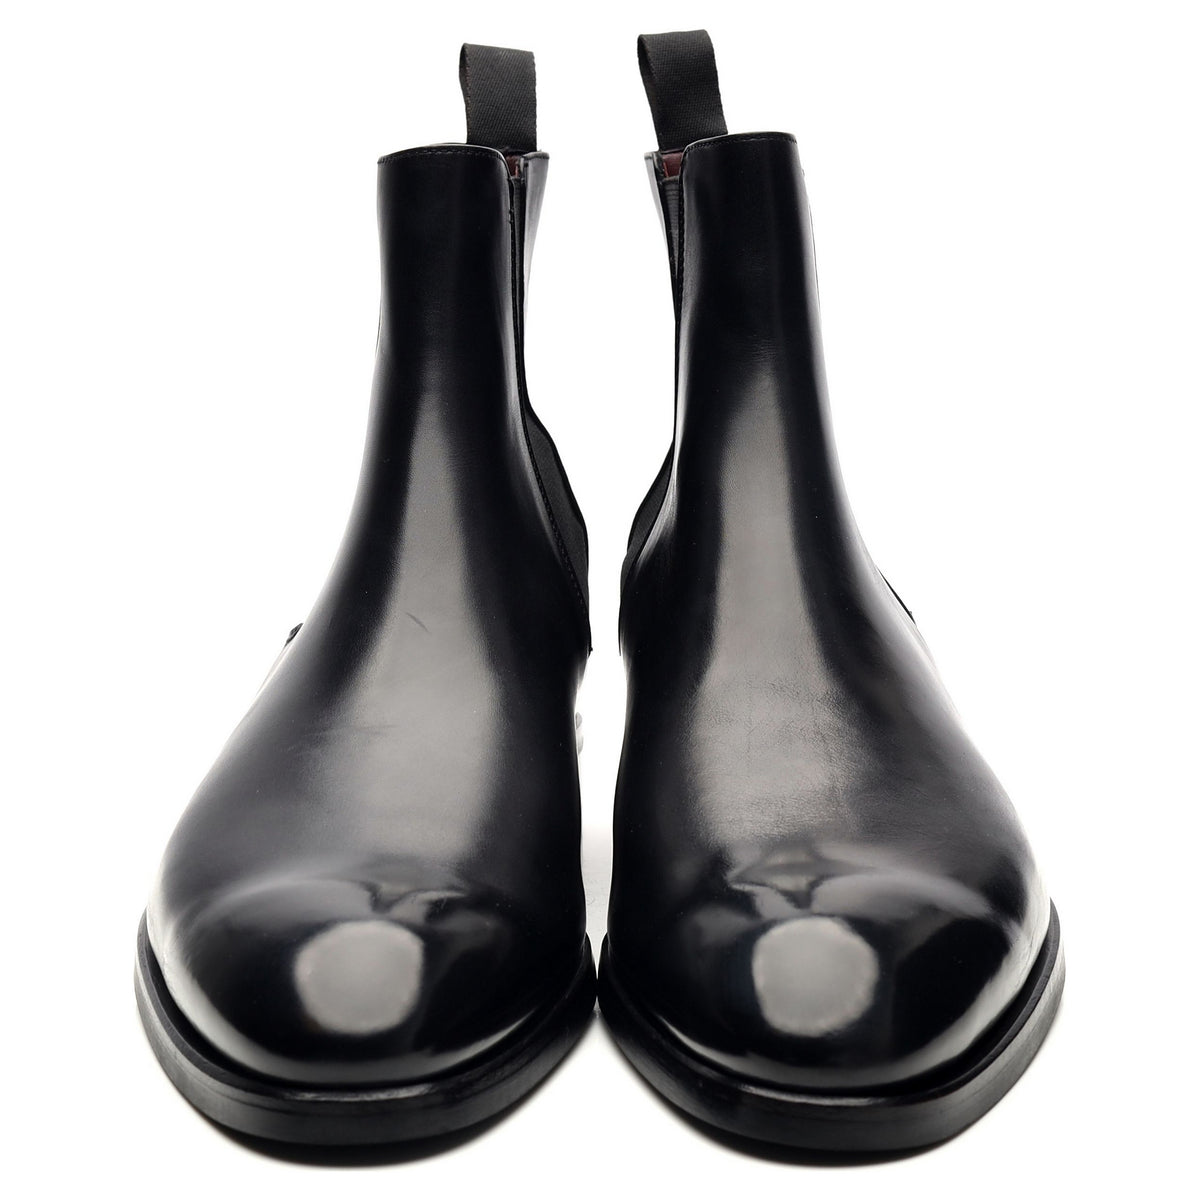 Black Leather Chelsea Boots UK 11